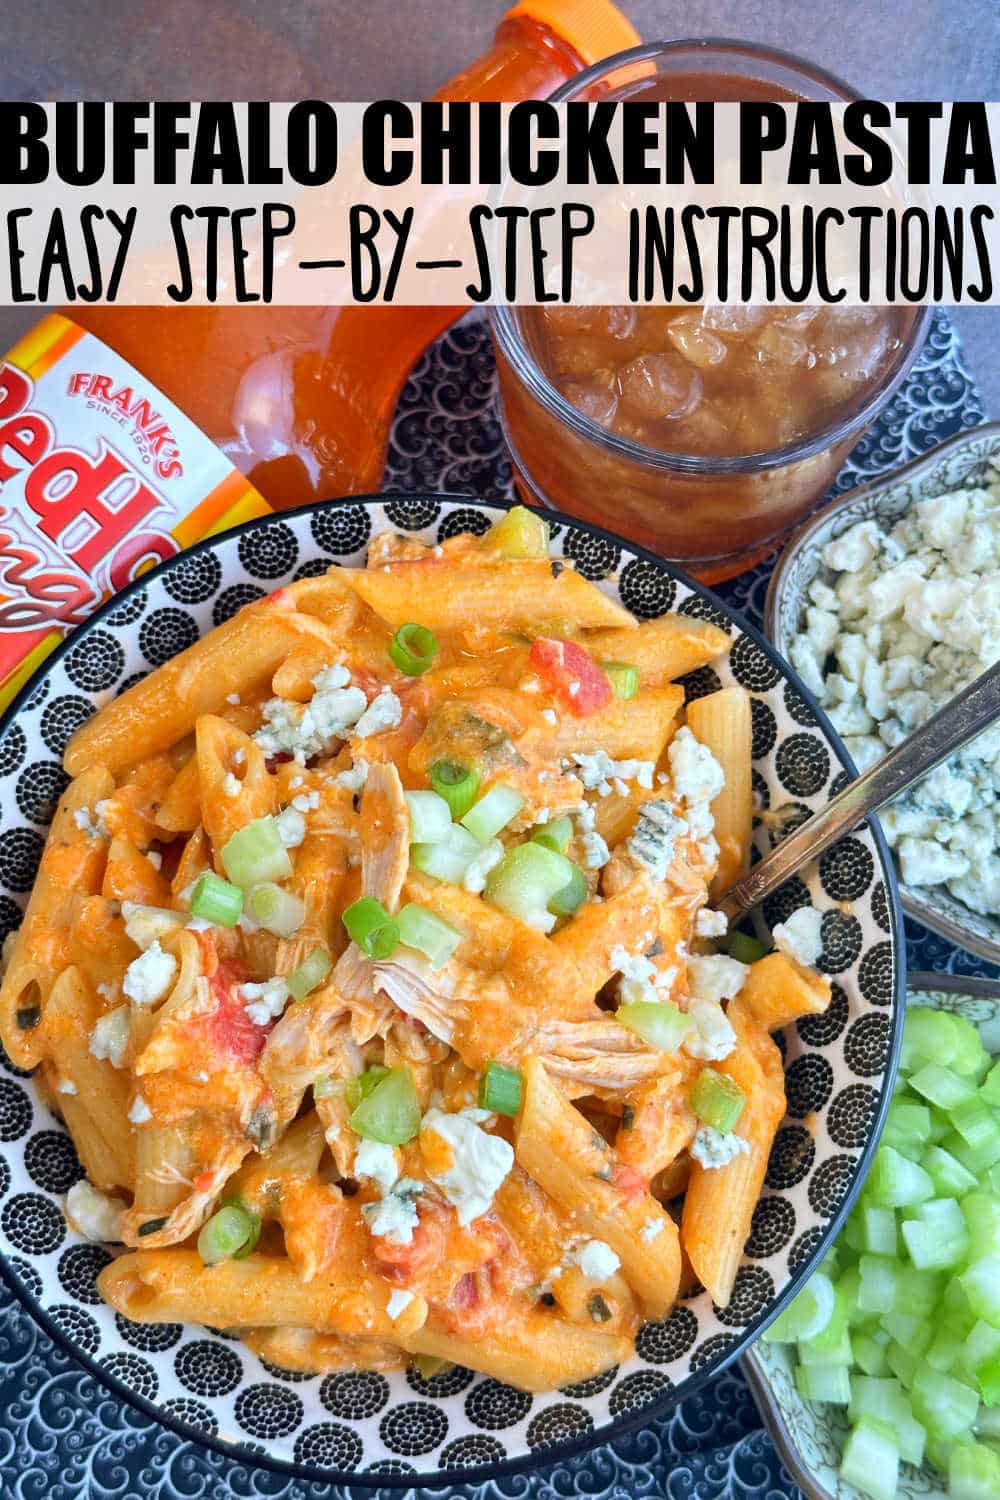 Spice up your weeknight dinner with this delicious and easy one pot buffalo chicken pasta recipe. Made with just a few simple ingredients, this dish is sure to become a family favorite! via @foodtasticmom